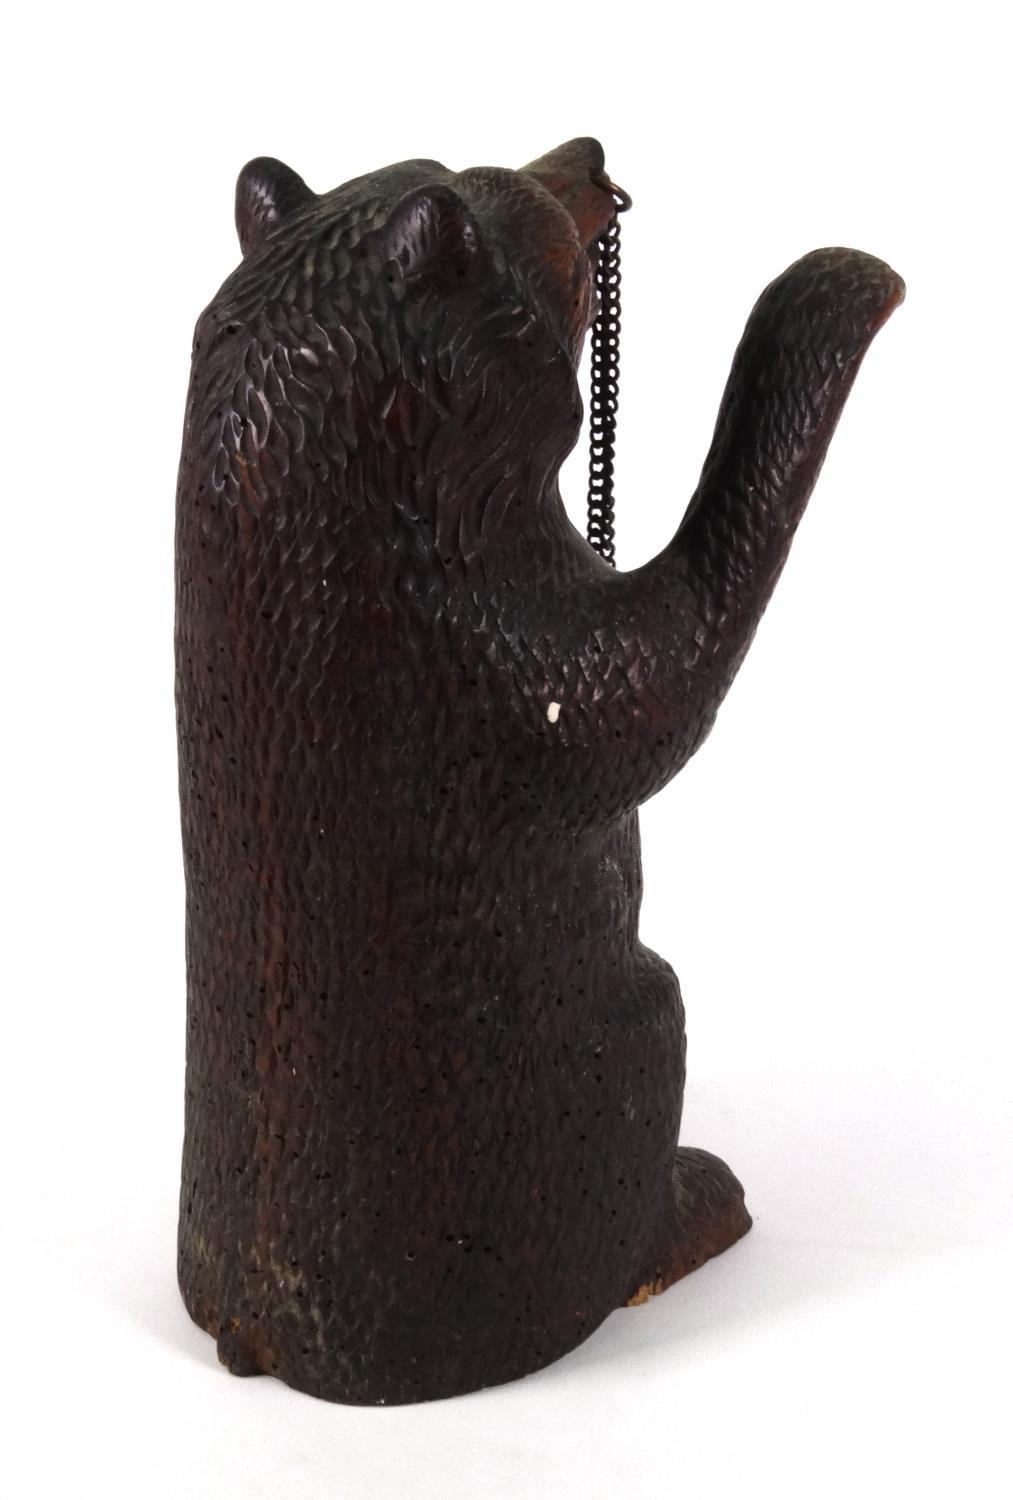 Black Forest carved wooden standing bear with beaded glass eyes, 30cm high - Image 4 of 5